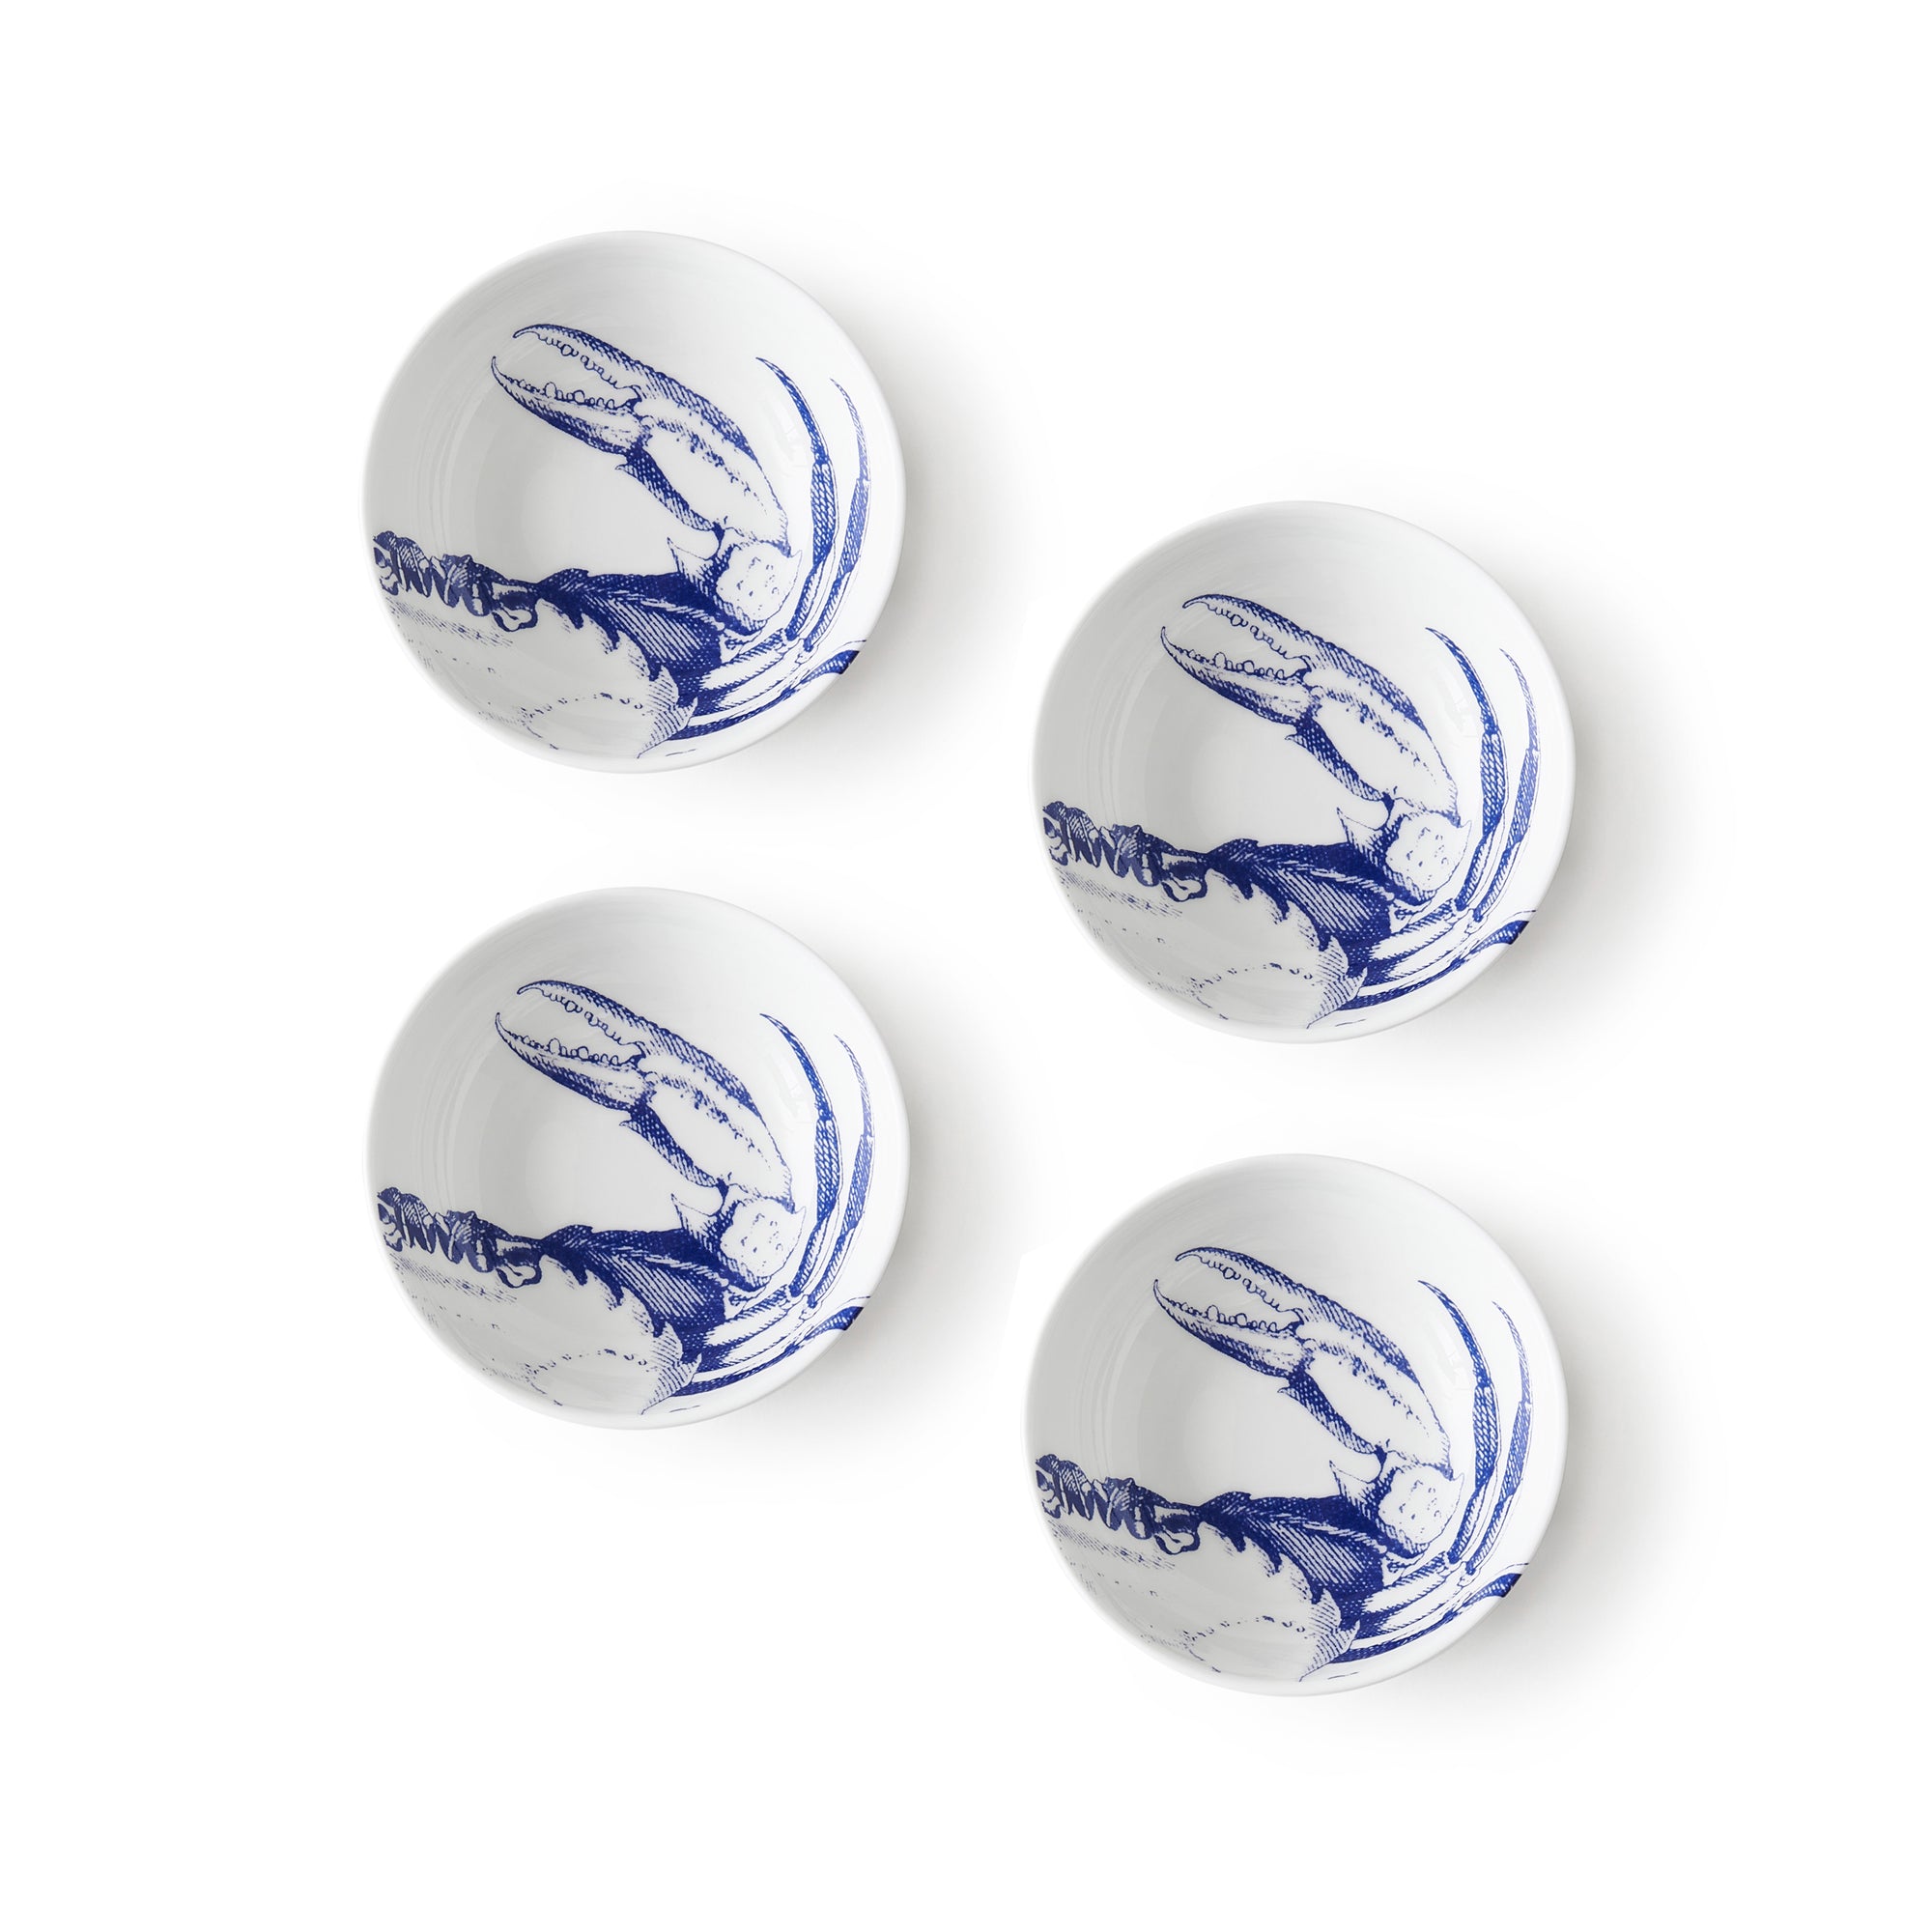 Four white bone china bowls with blue crab pattern illustrations placed in a grid pattern on a white background, perfect for serving sauces—Crab Dipping Dishes, Set of 4 by Caskata.